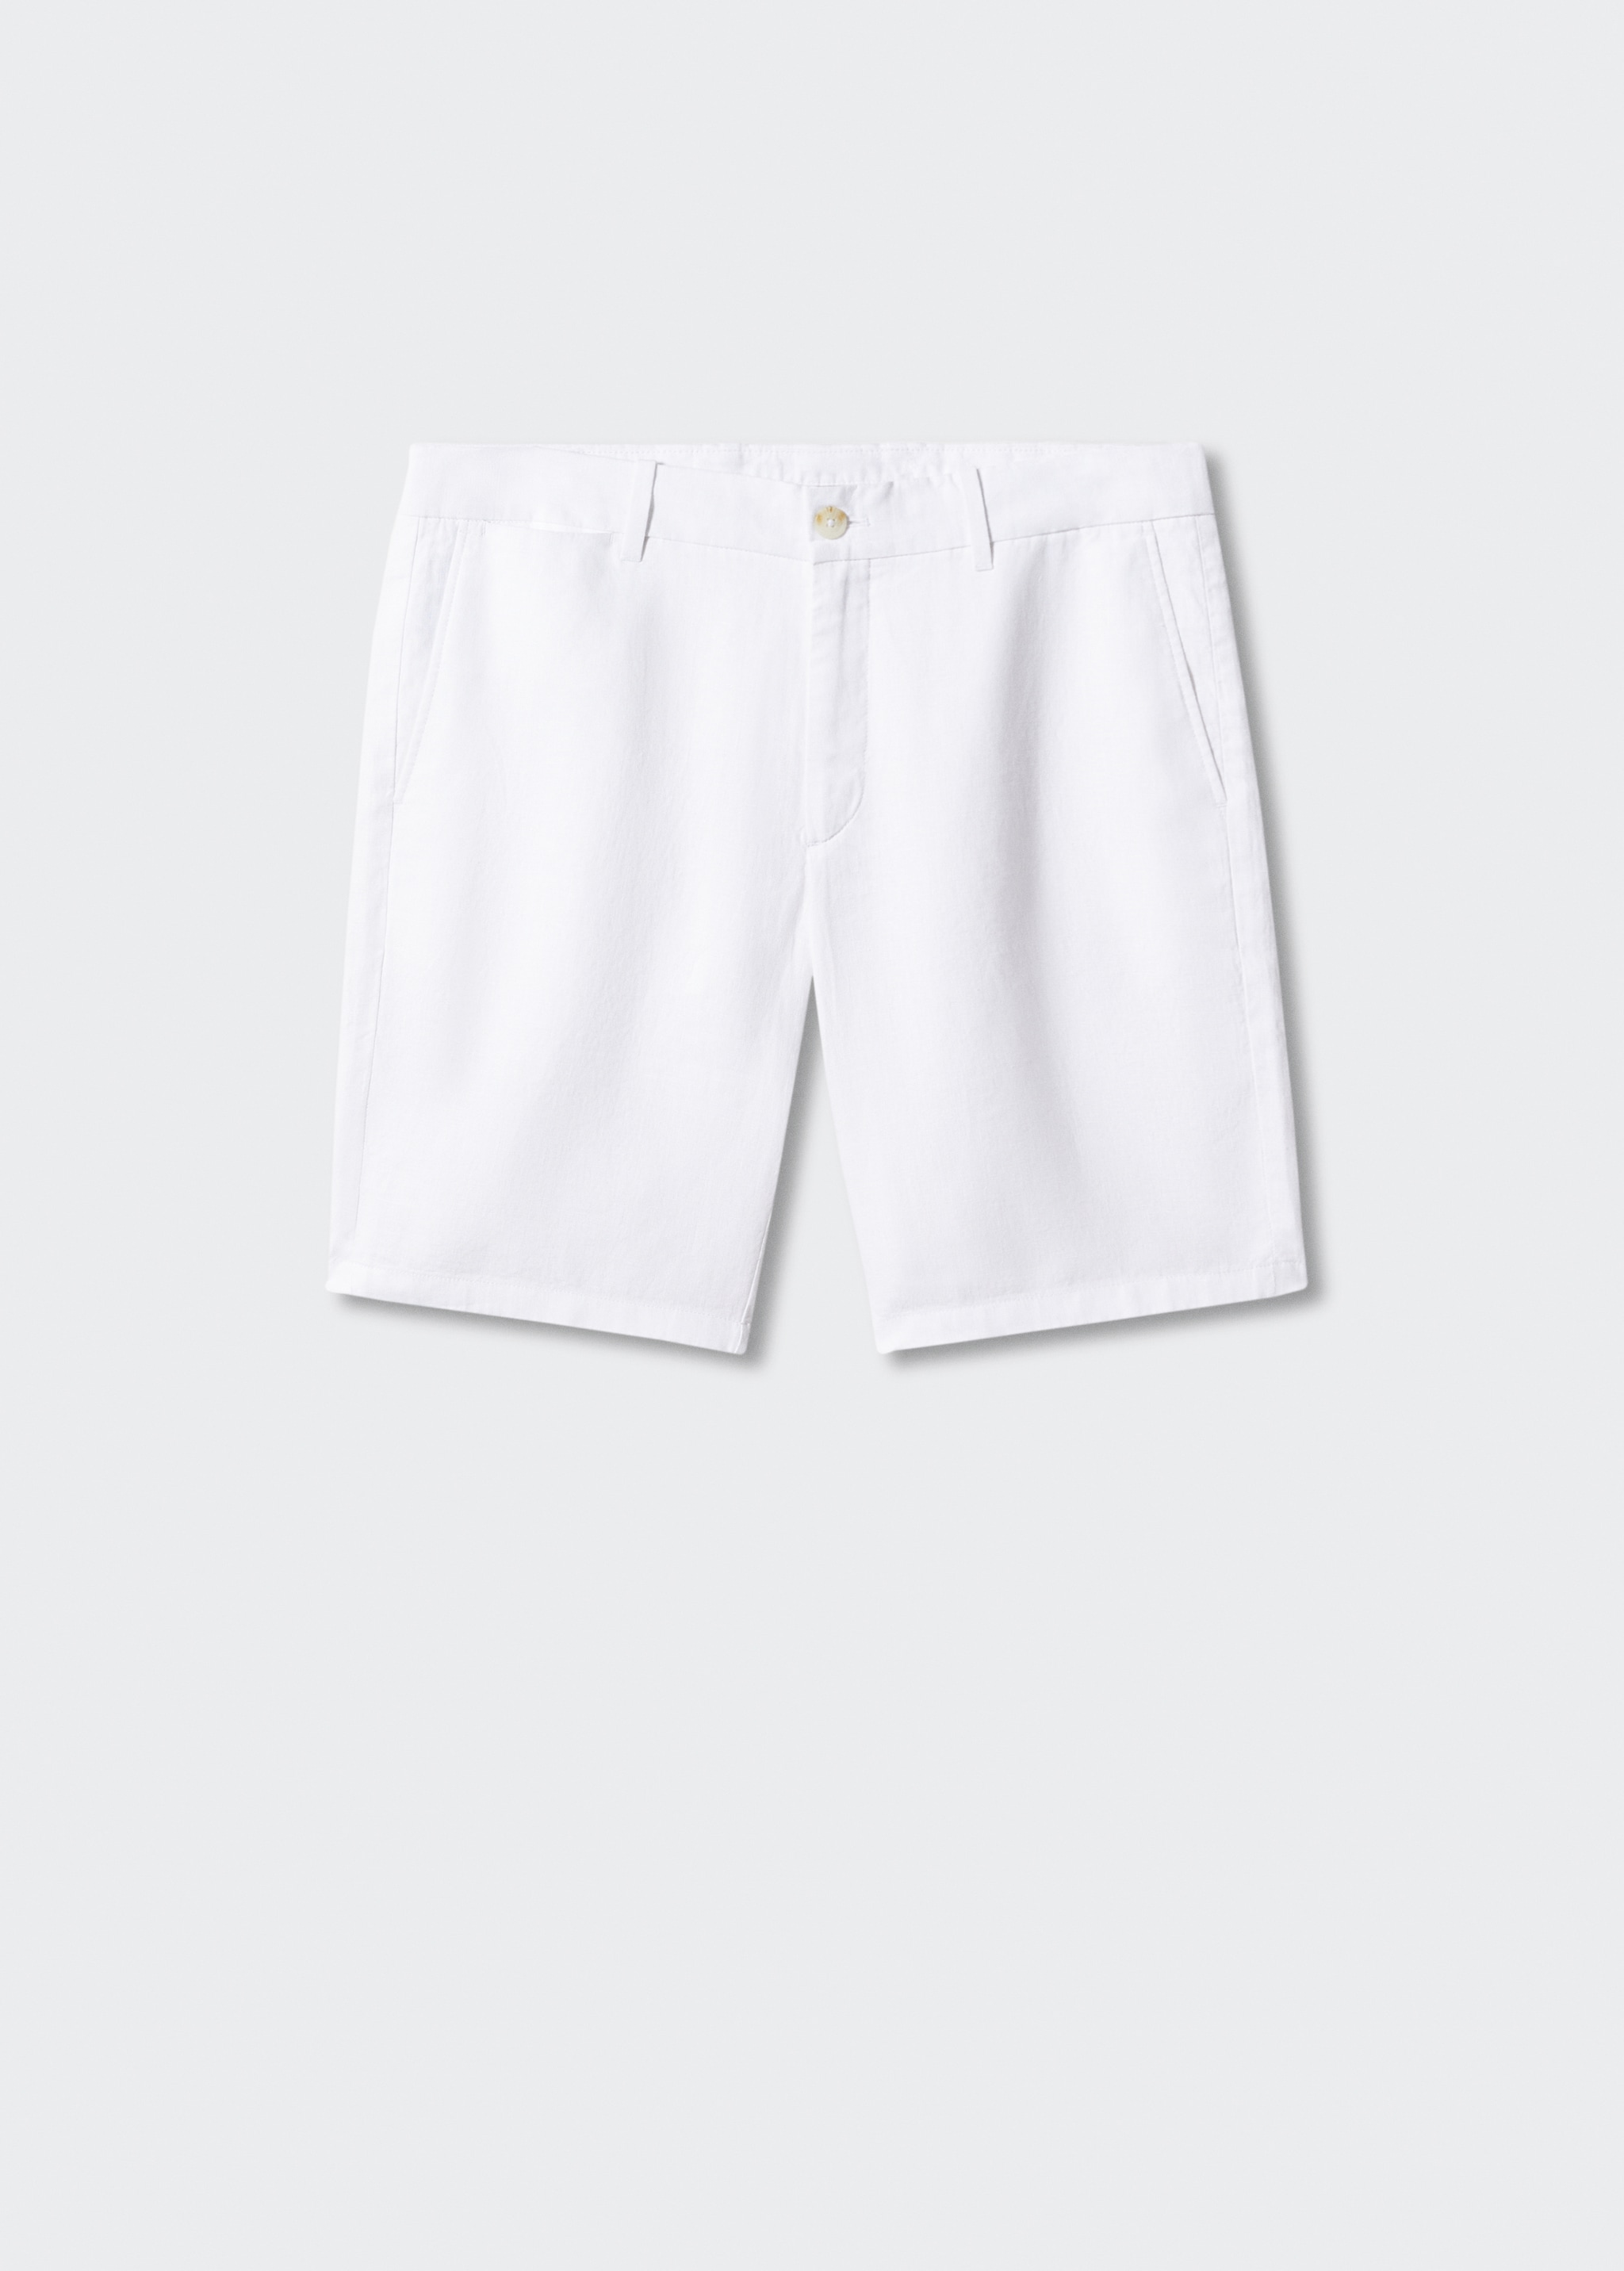 100% linen shorts - Article without model